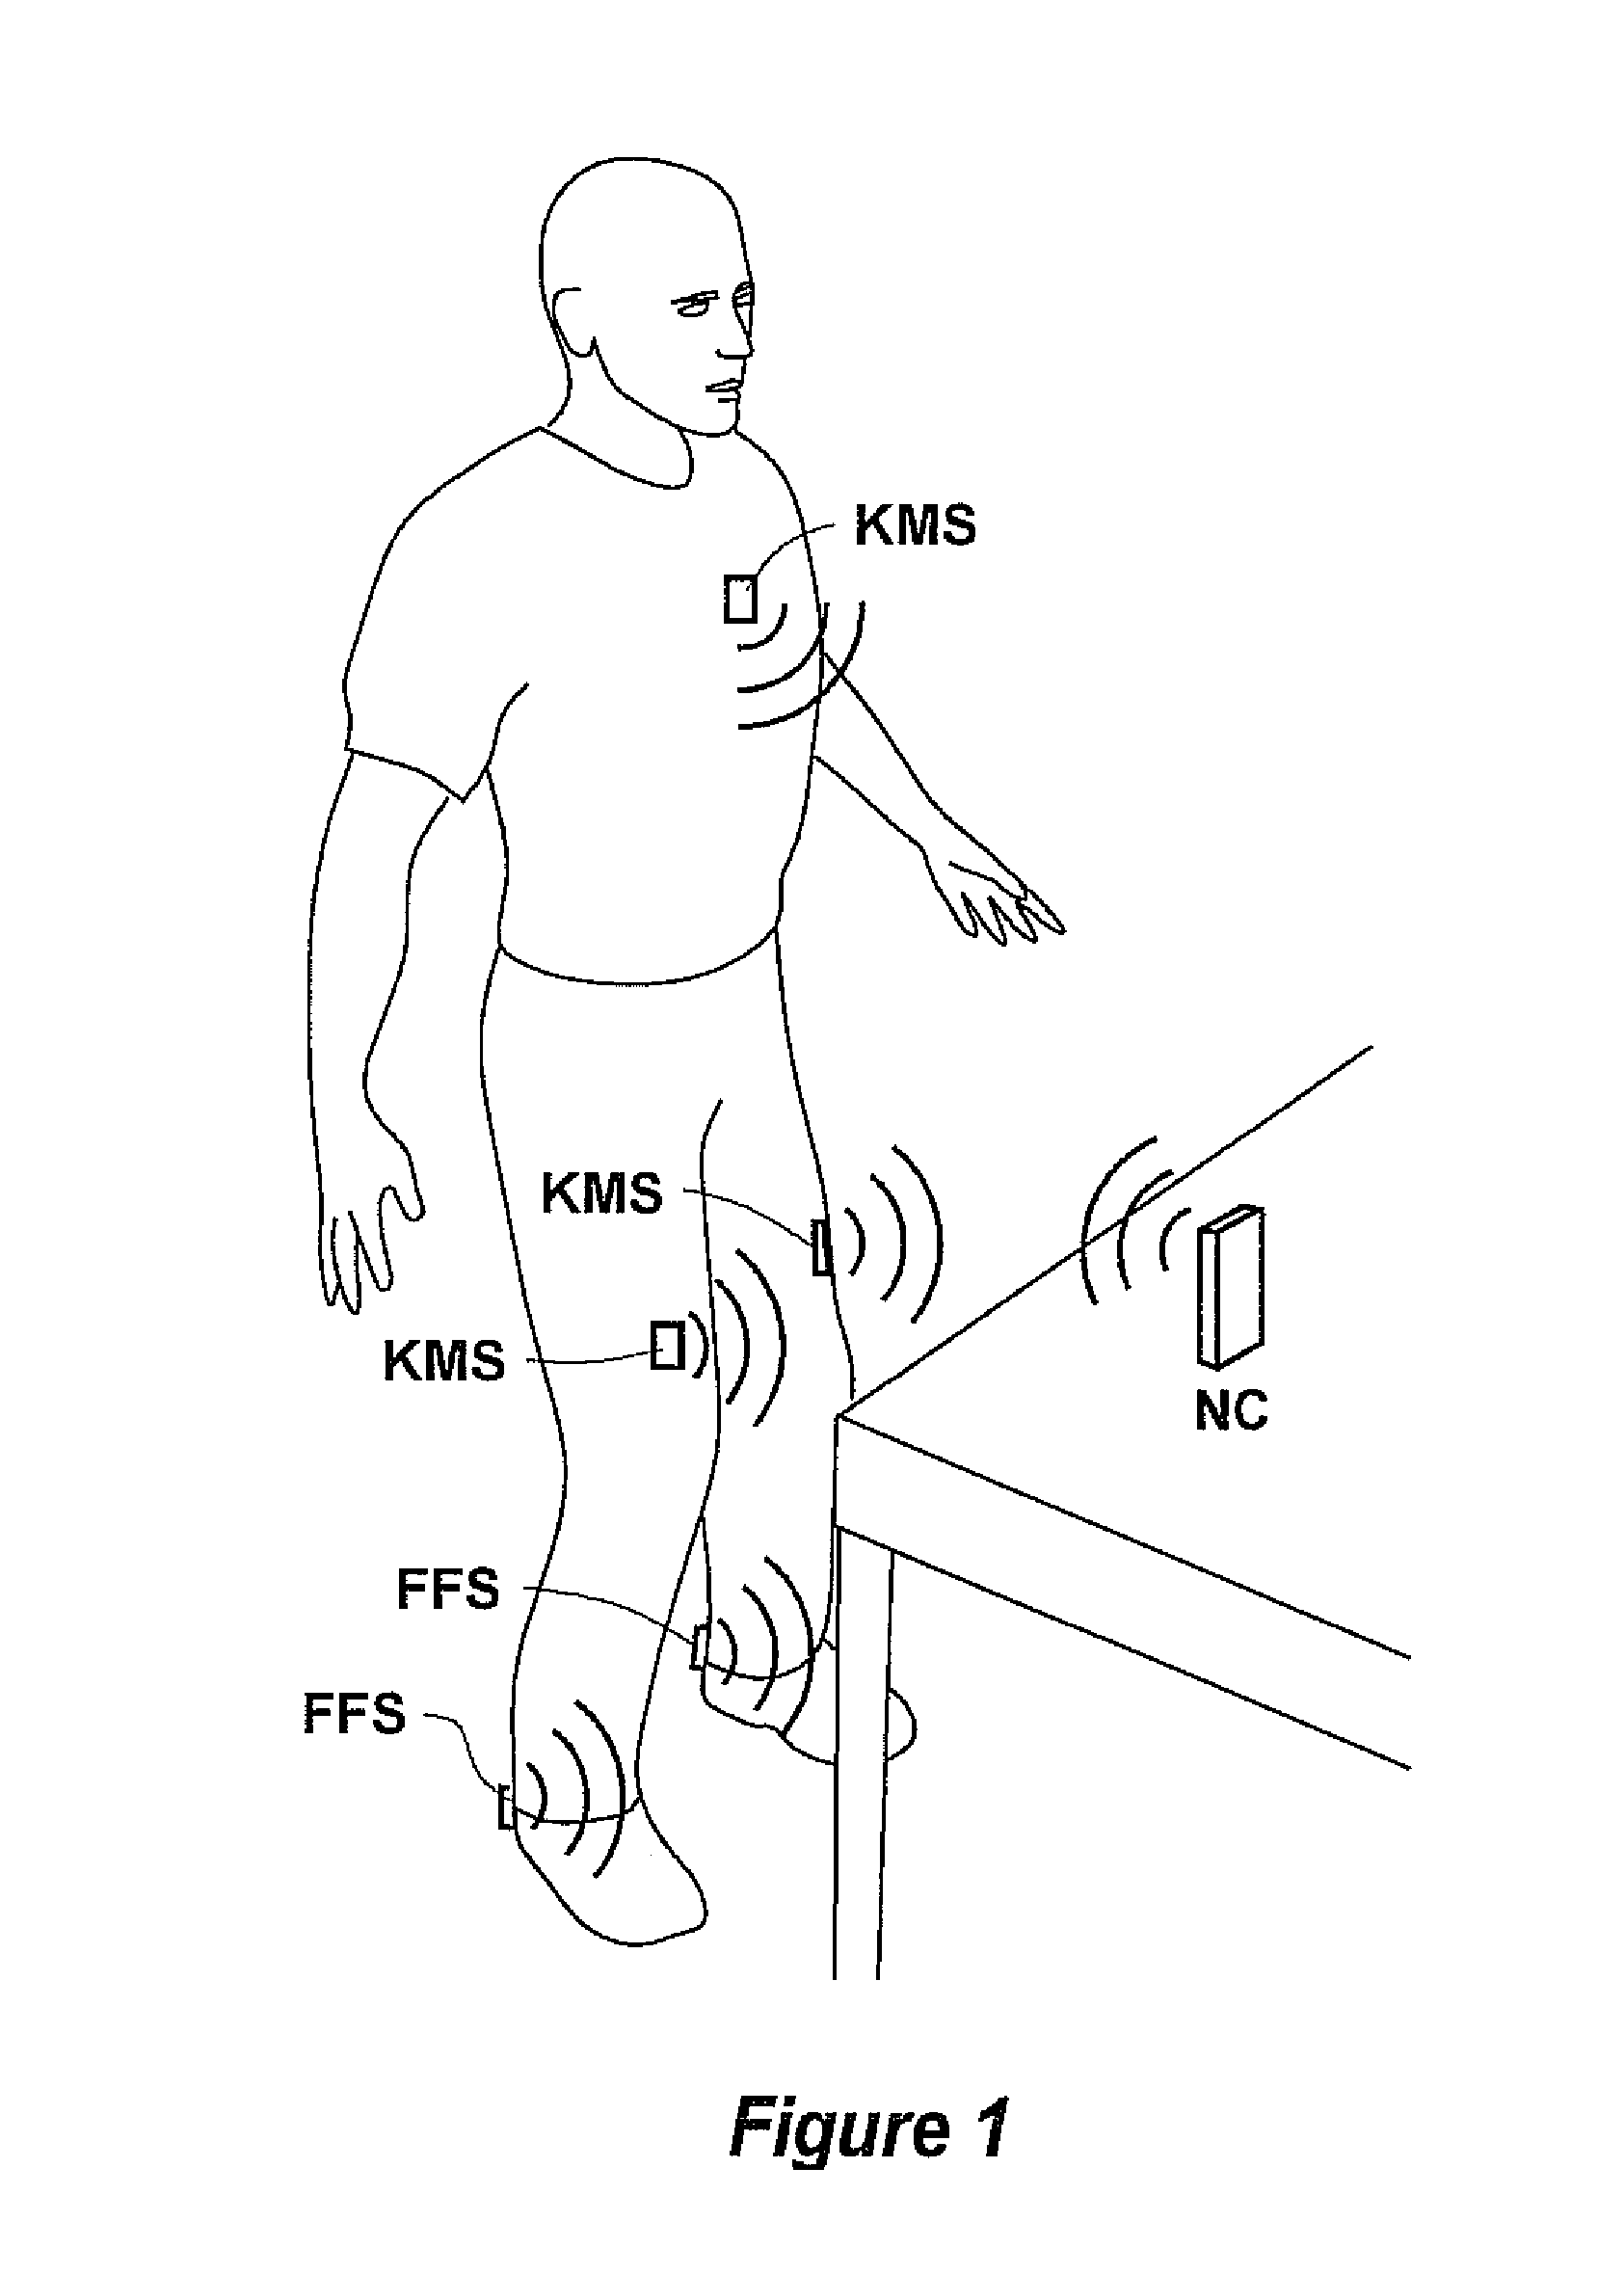 Loss-of-balance and fall detection system